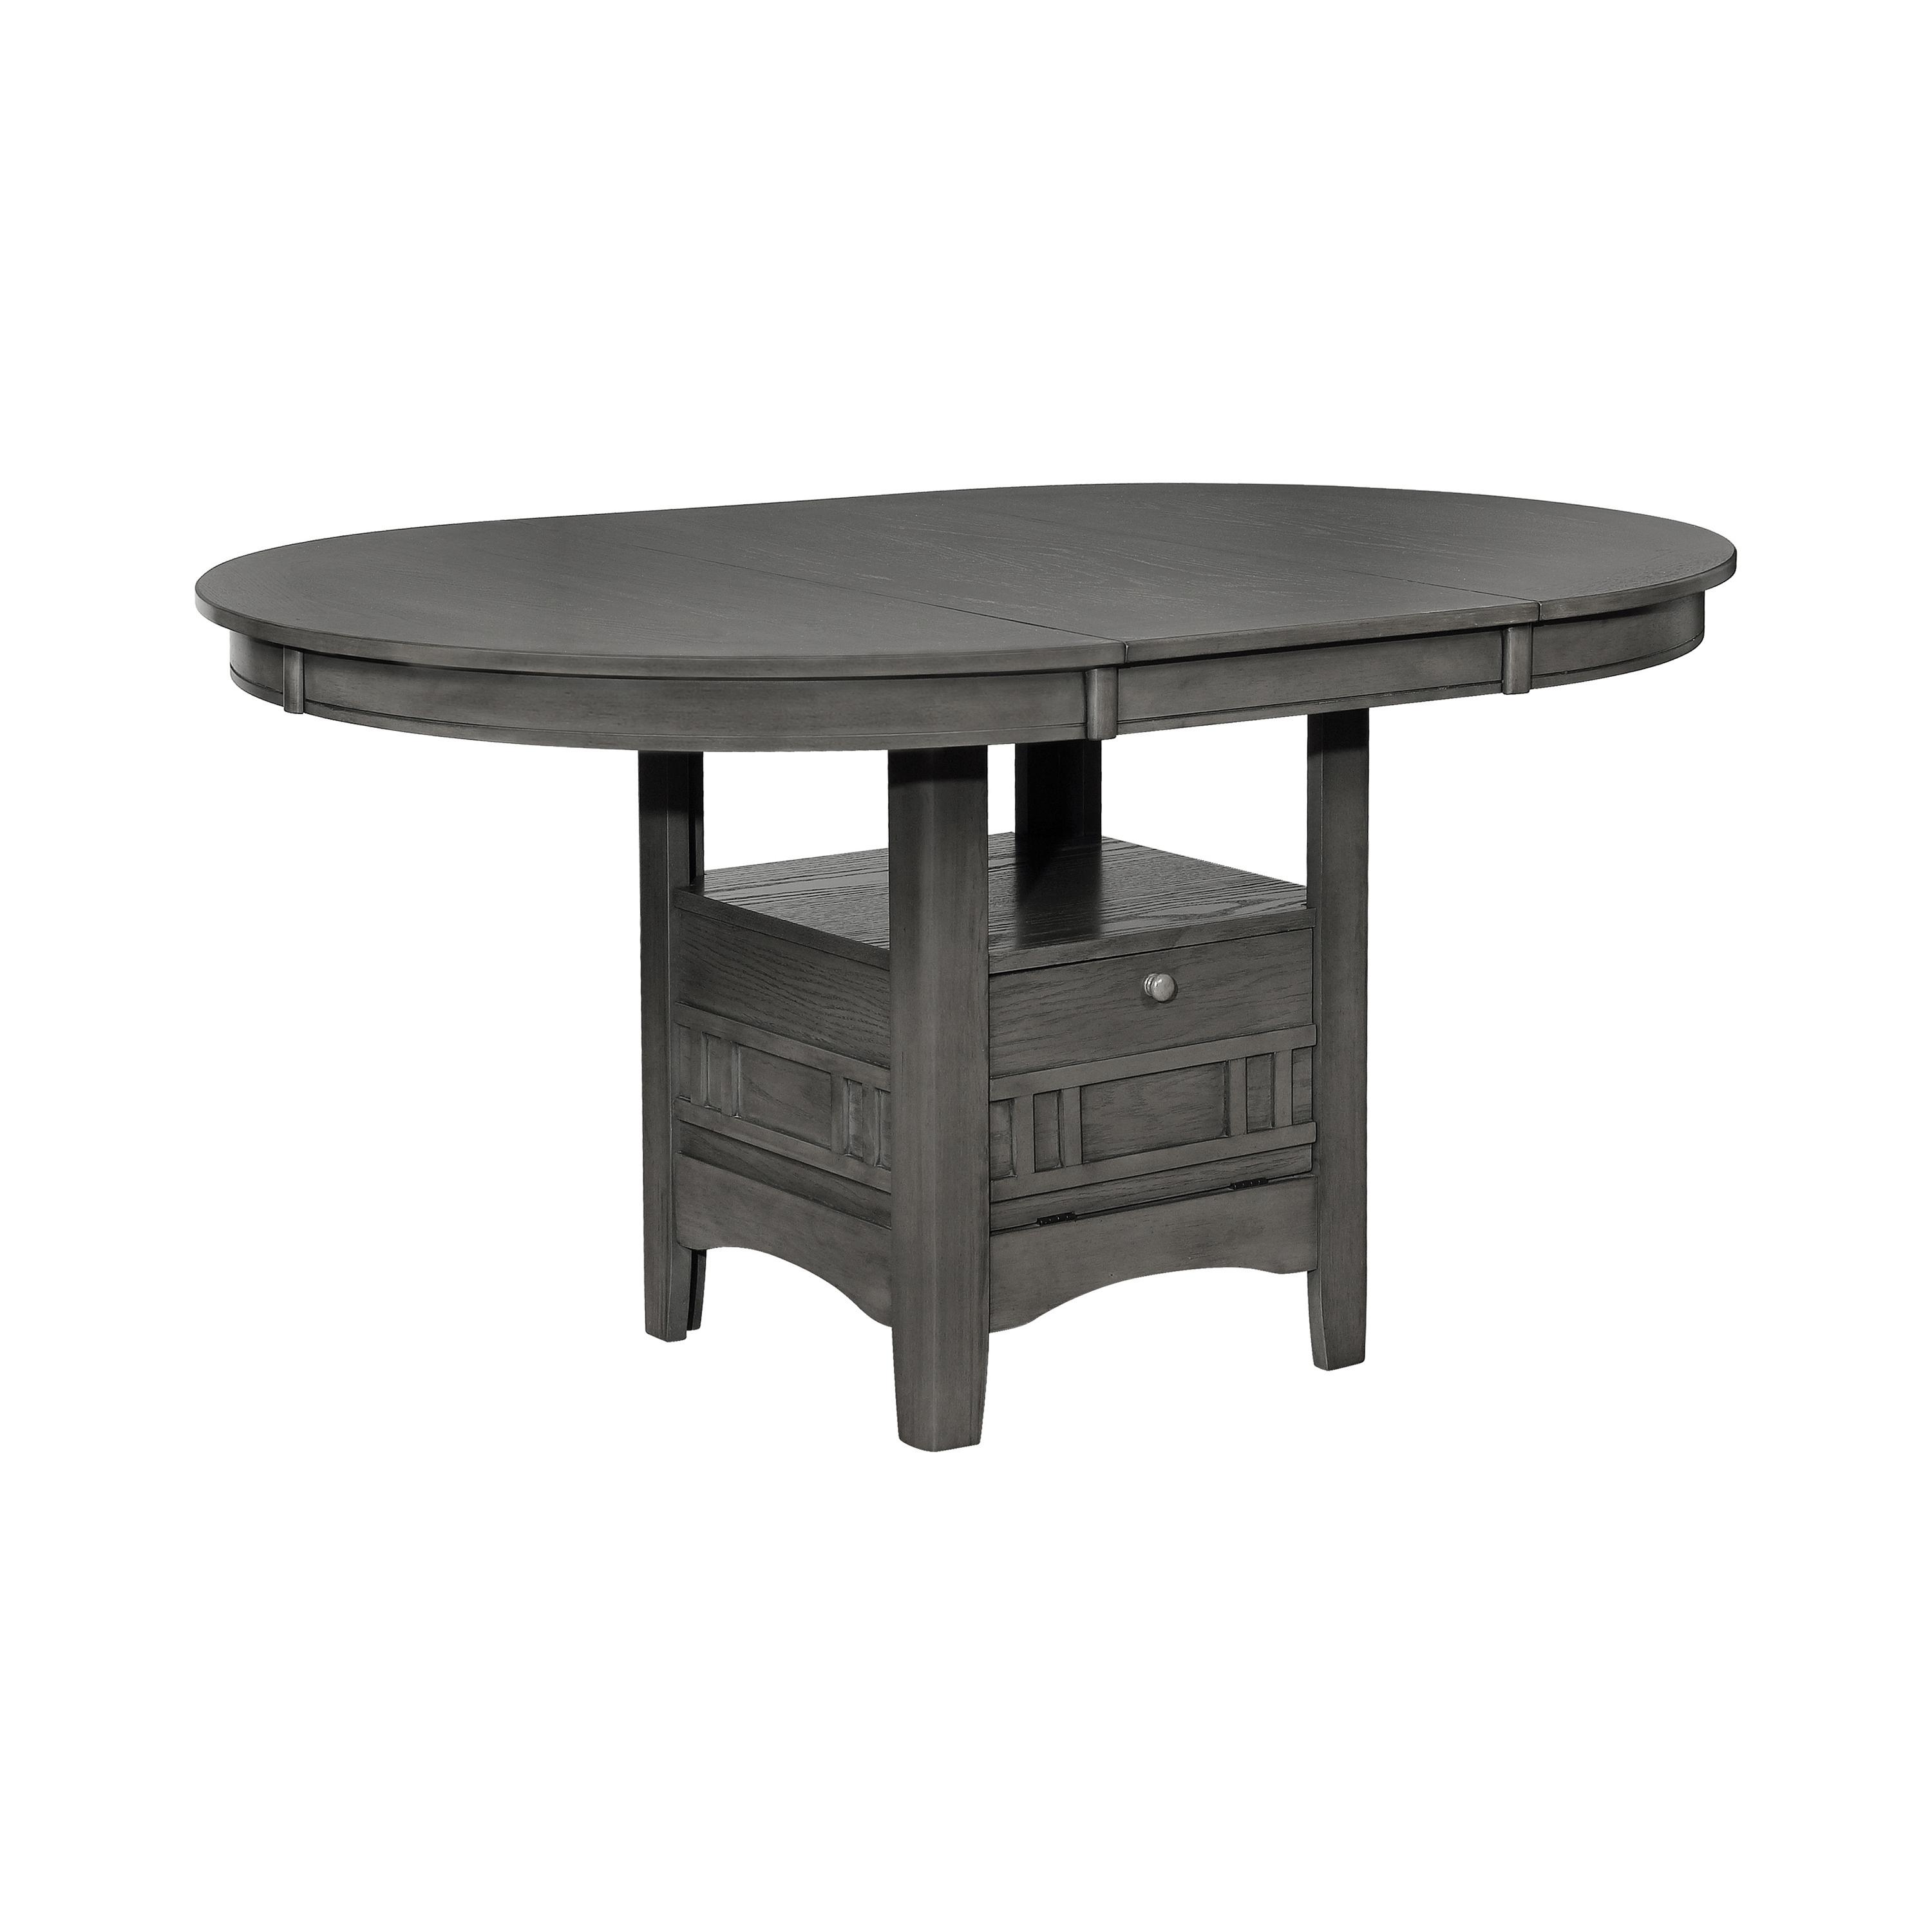 Transitional Dining Table 108211 Lavon 108211 in Gray 